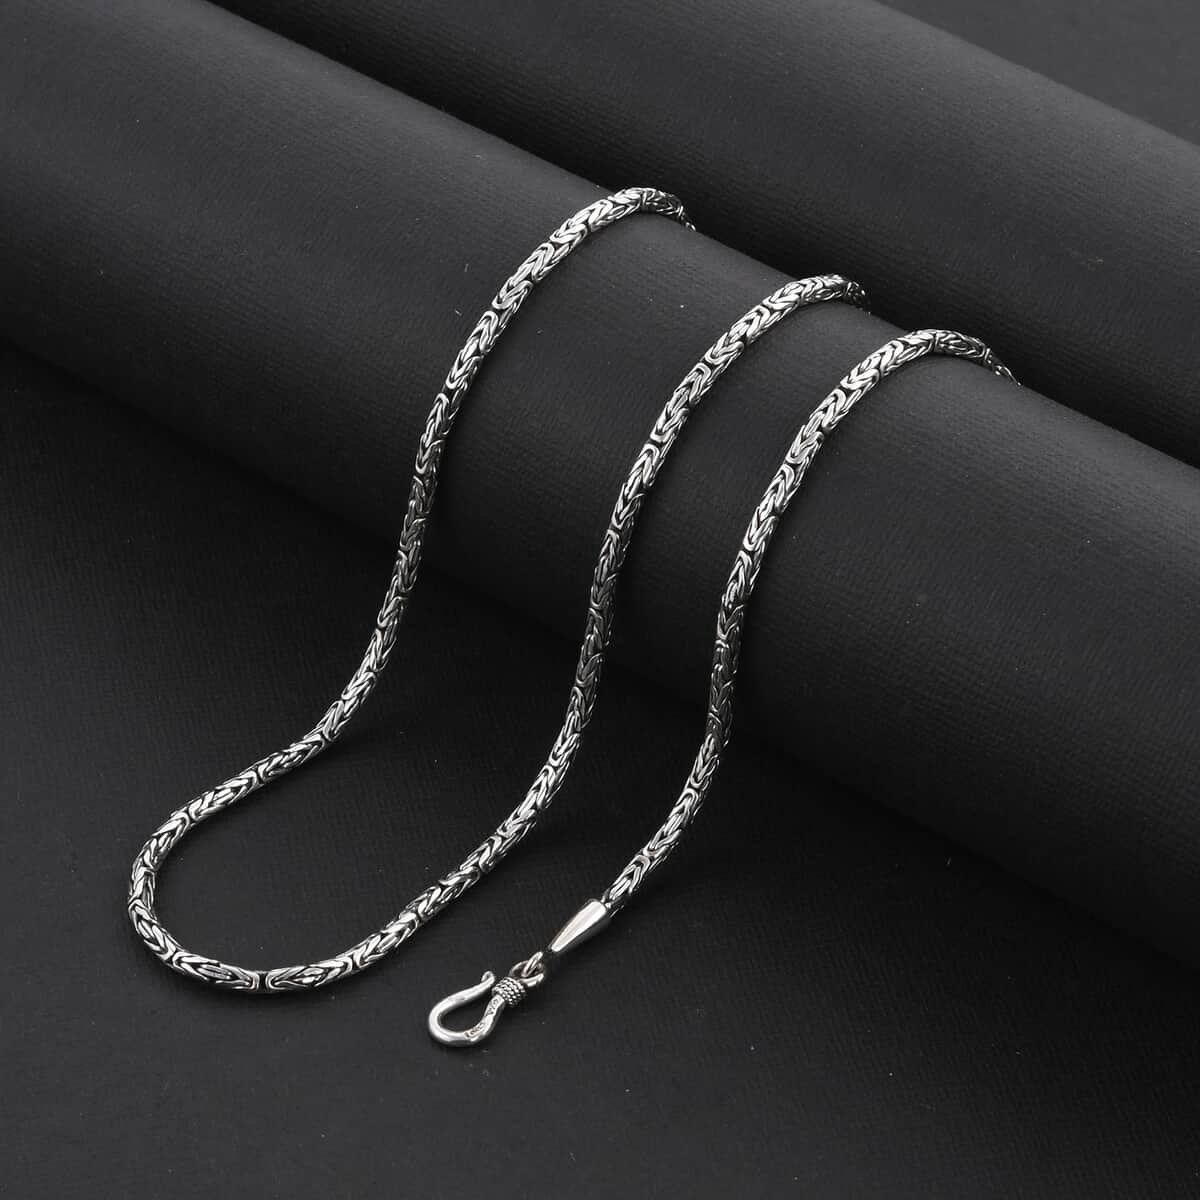 Buy Bali Legacy Sterling Silver Borobudur Necklace 22 Inches 24.40 ...